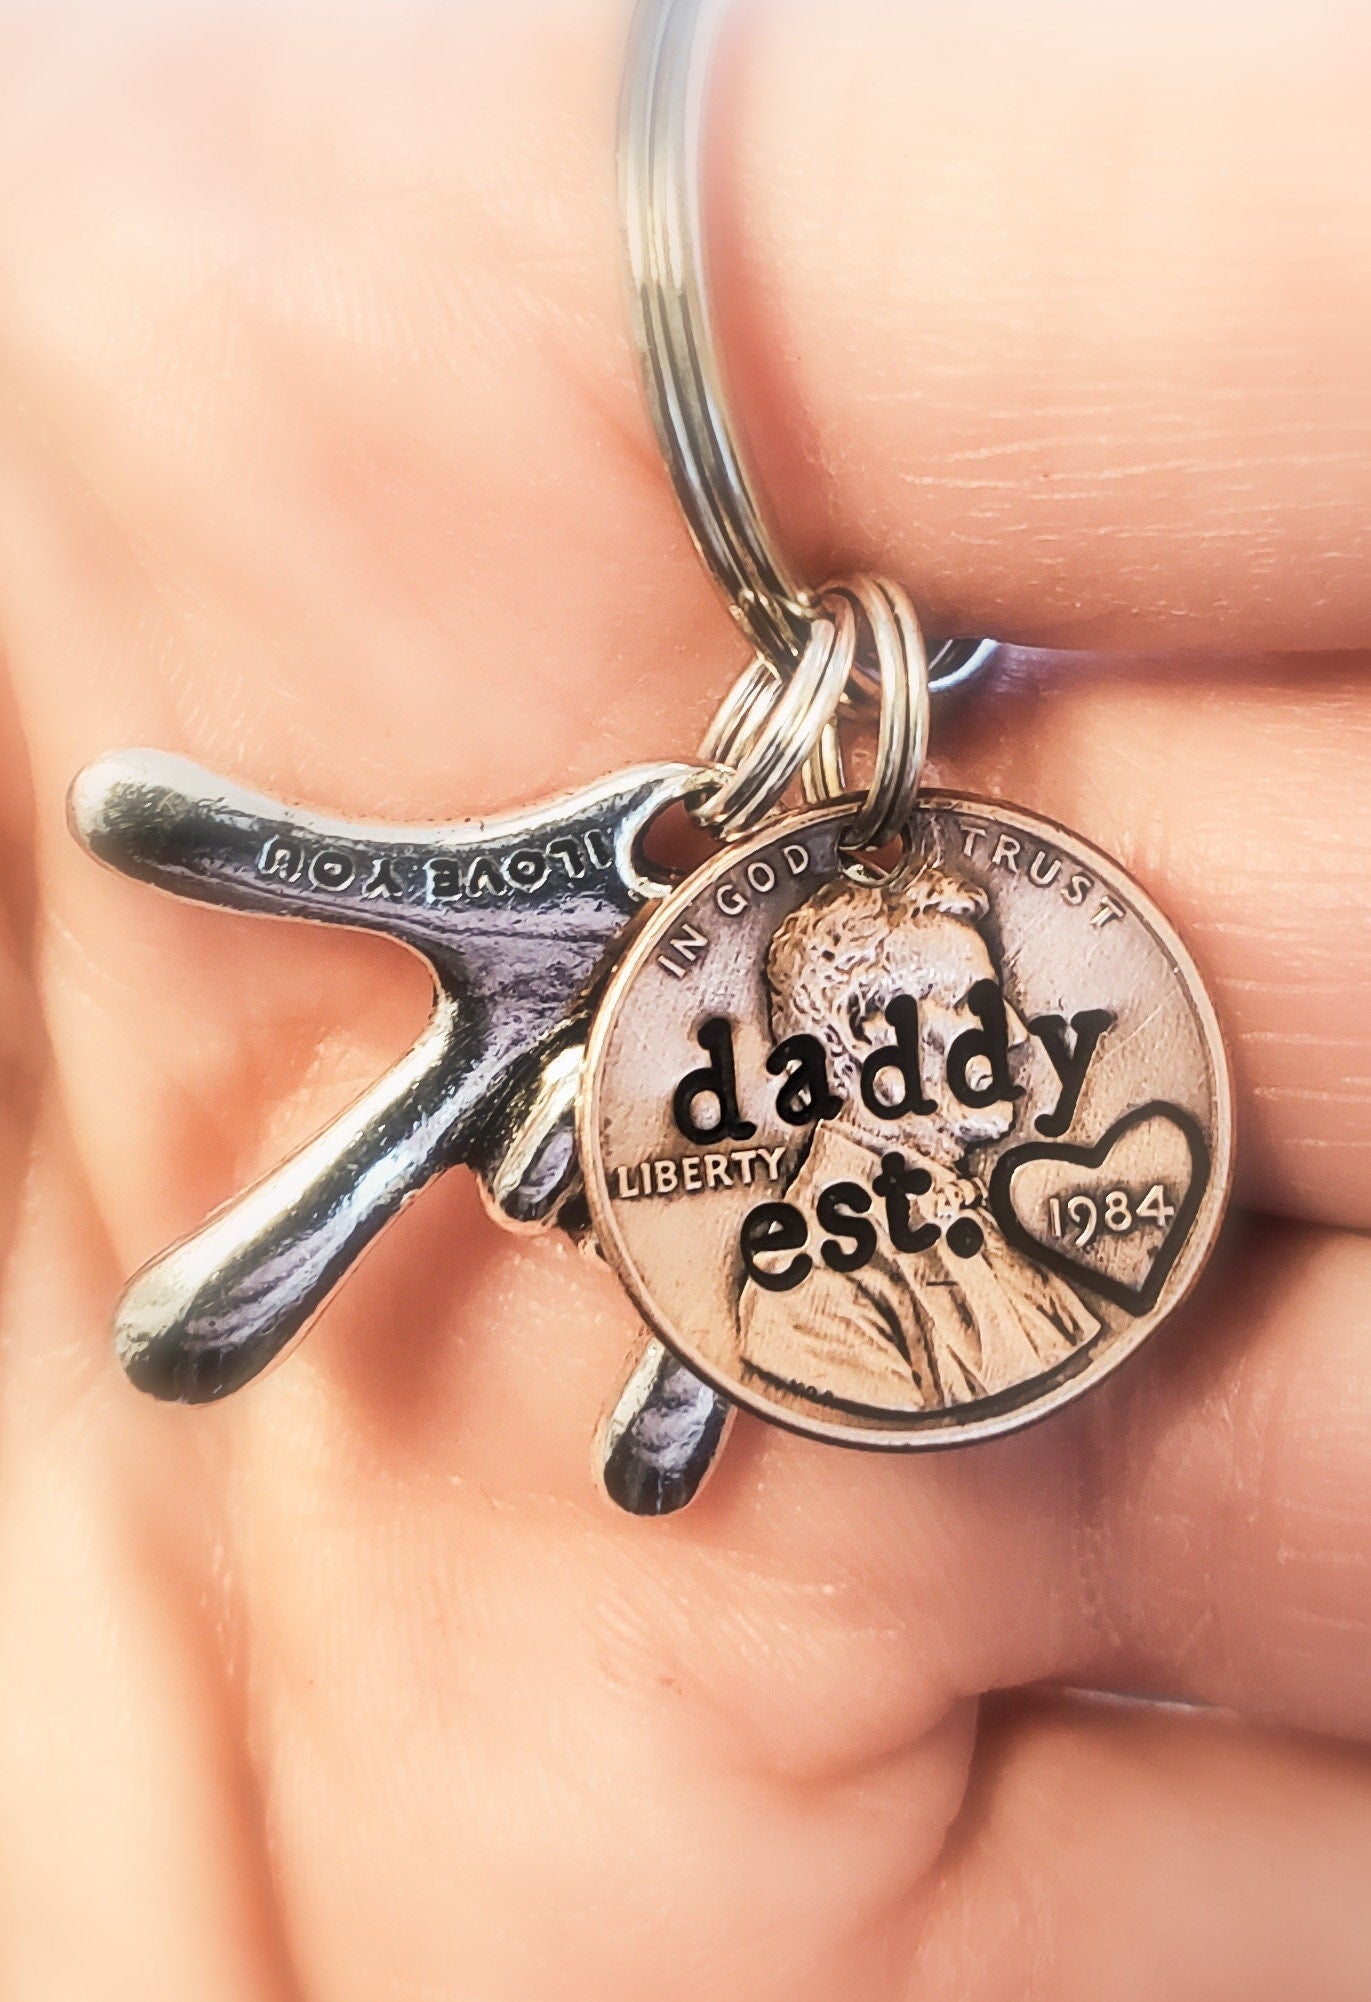 Personalized Gift For Daddy | Lucky Penny Keychain | Father's Day | Unique | Birthday | Custom